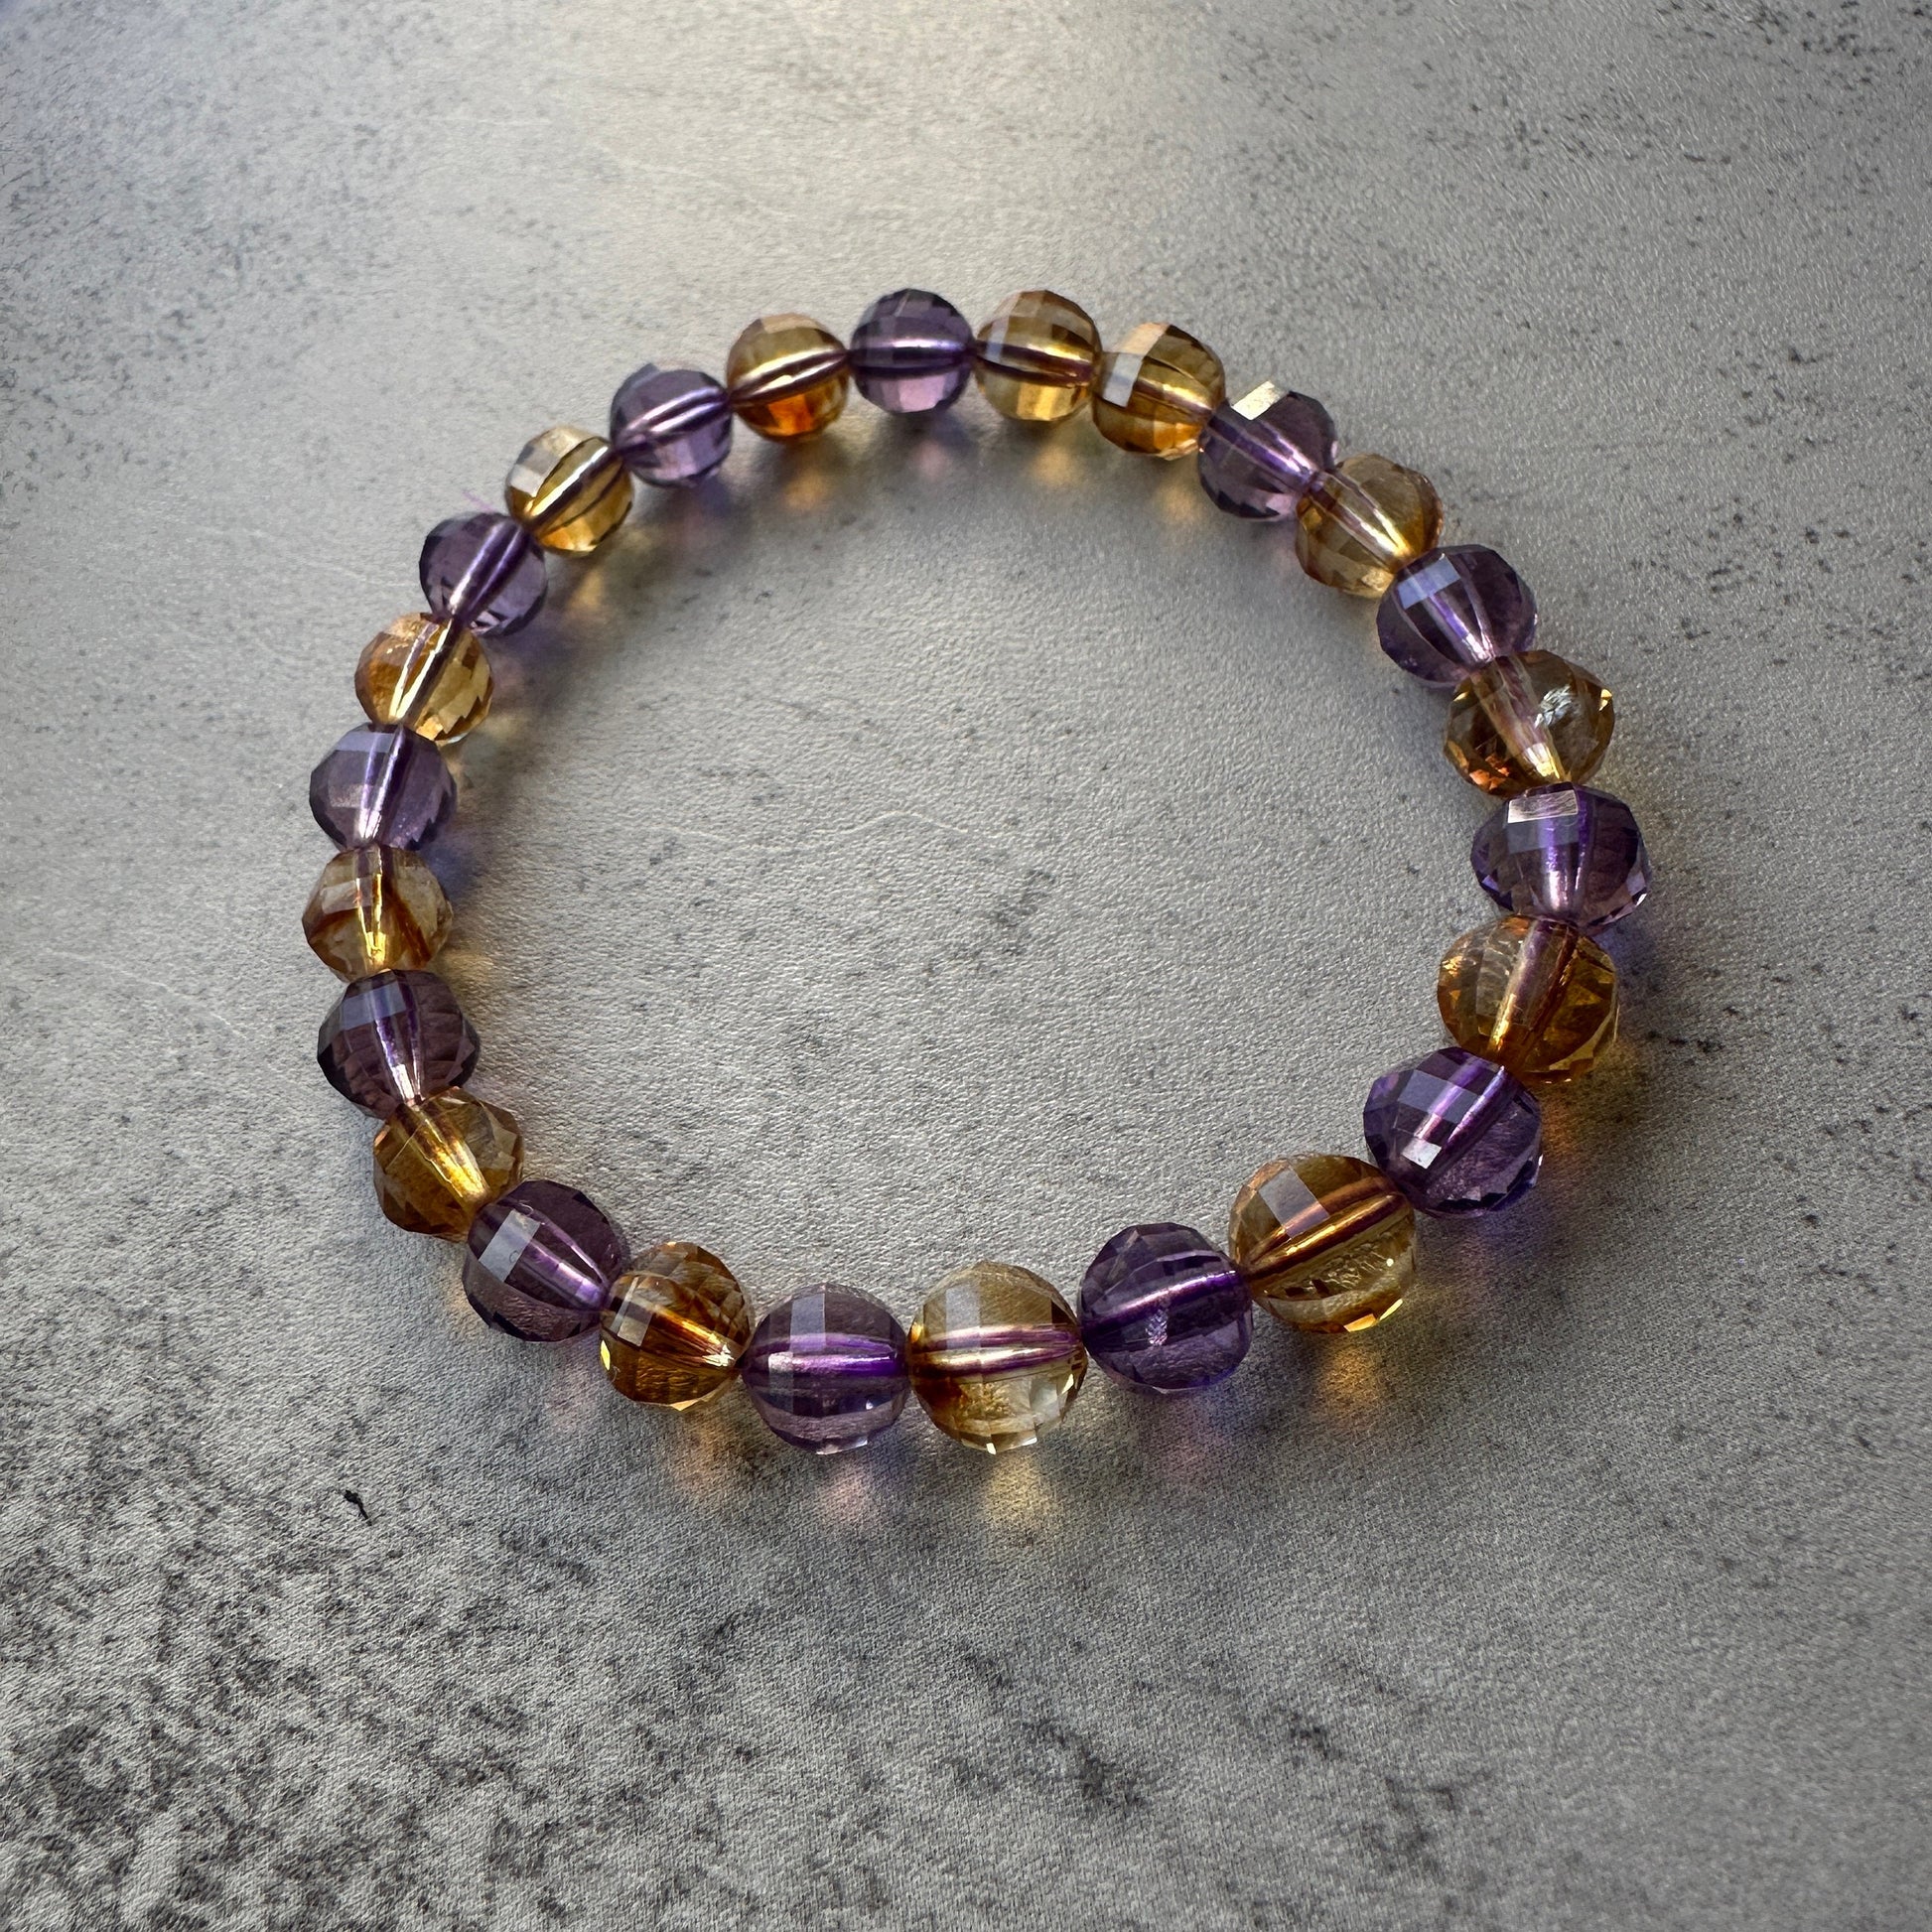 Elegant Citrine & Amethyst Faceted Bracelet With AAA Clarity High-Quality Crystal